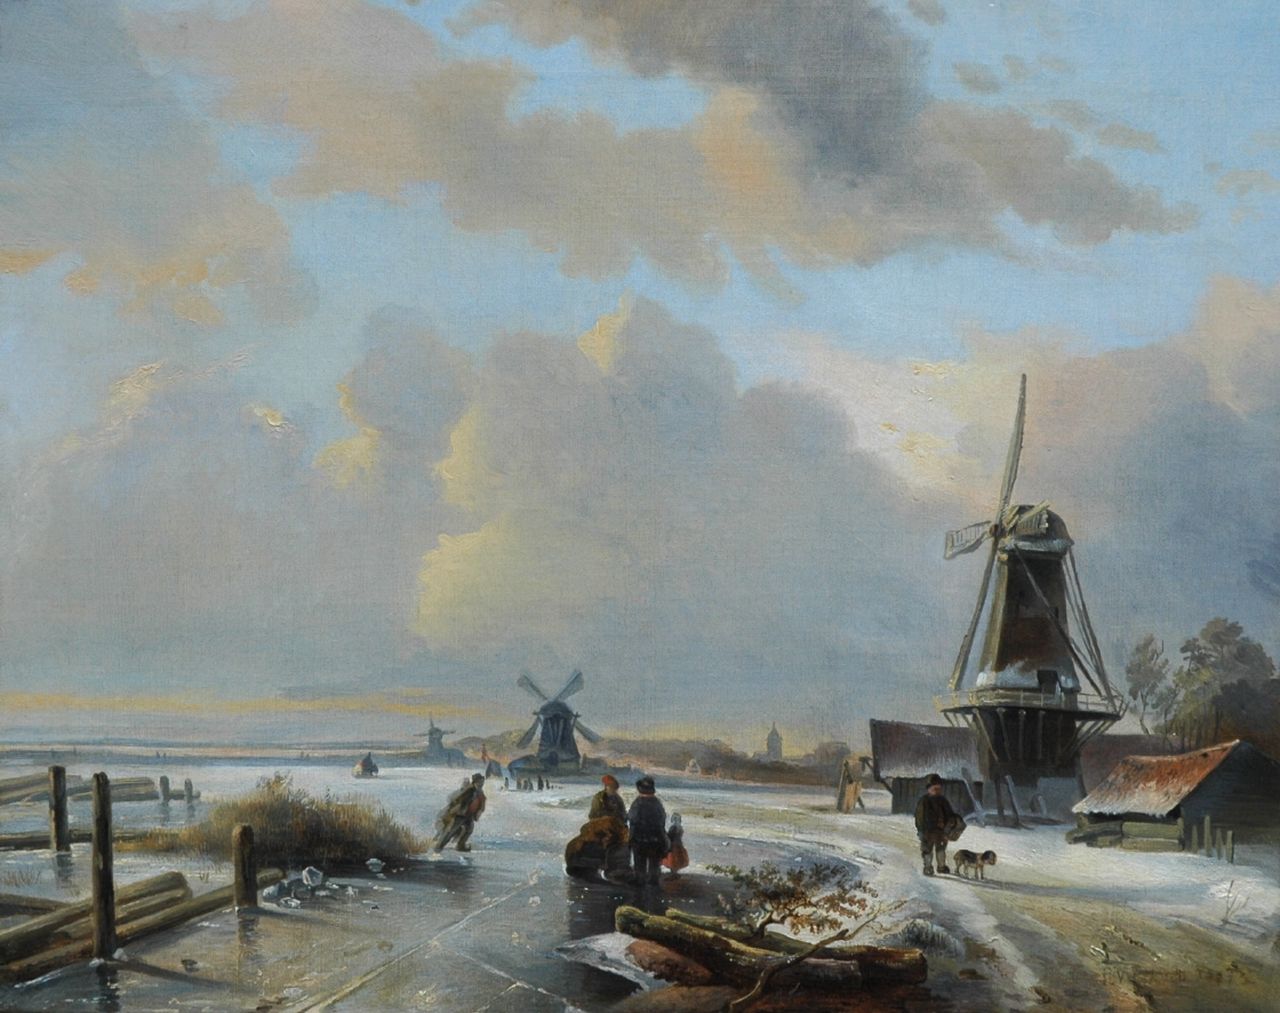 Pieter Voskuil | A winter landscape with skaters on a frozen waterway, Öl auf Leinwand, 39,1 x 48,8 cm, signed l.r. und dated 1837